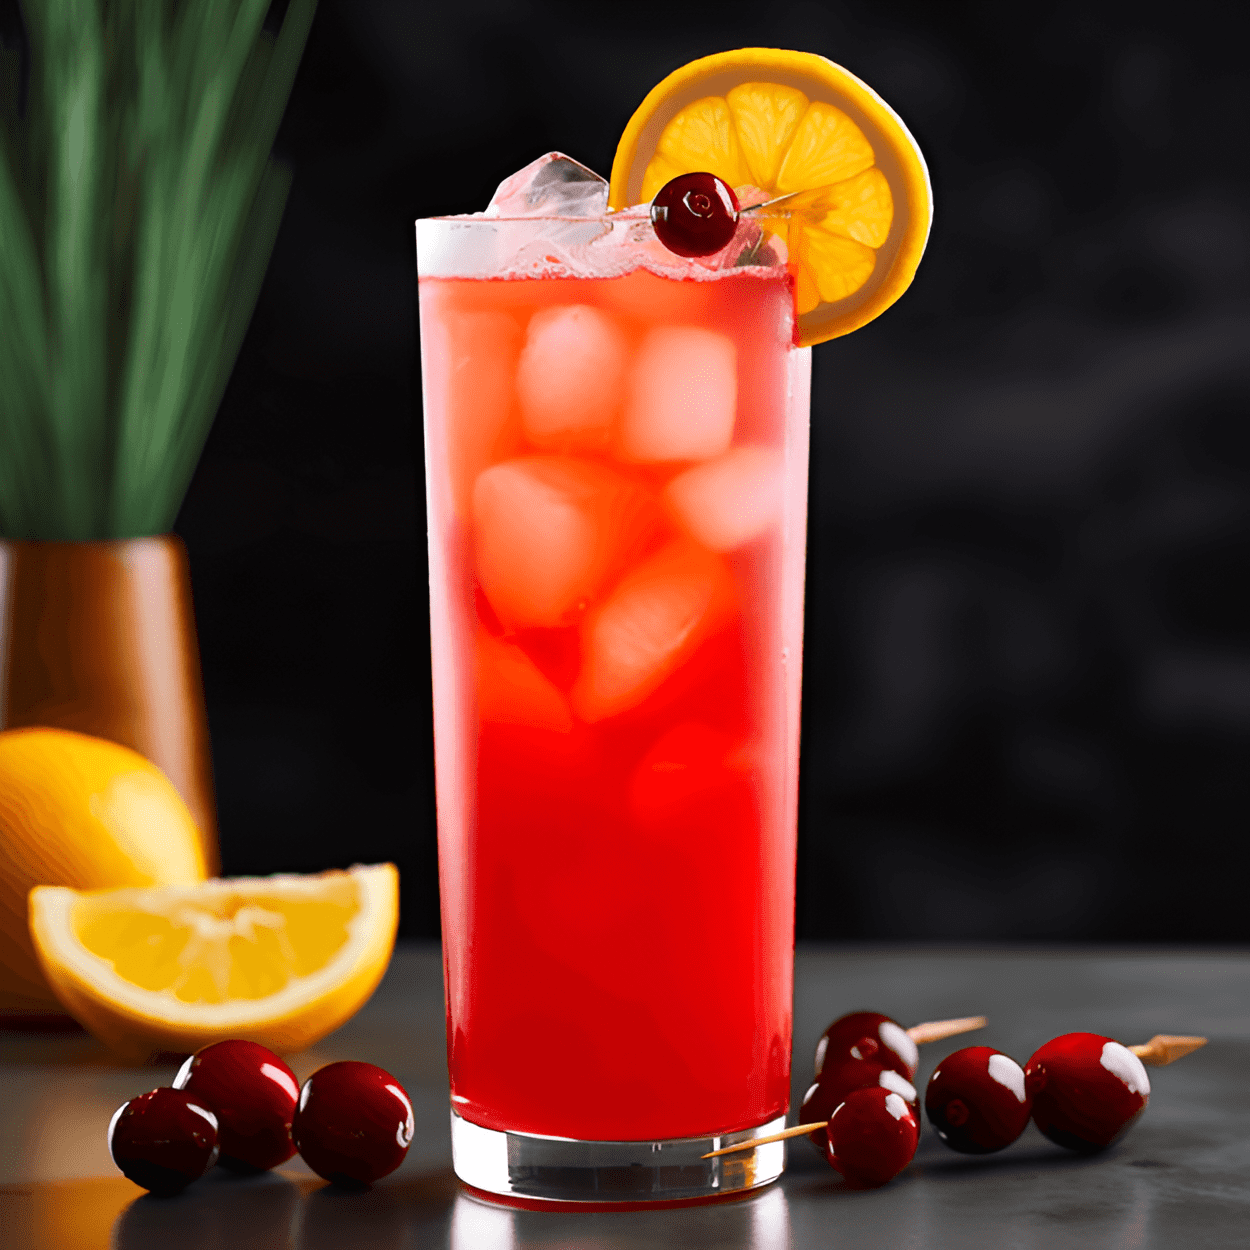 Wop Cocktail Recipe - The Wop cocktail is a delightful blend of sweet and sour flavors. The fruit juices provide a sweet, refreshing taste, while the vodka adds a subtle kick. The cocktail is fruity, tangy, and slightly fizzy, making it a perfect summer drink.